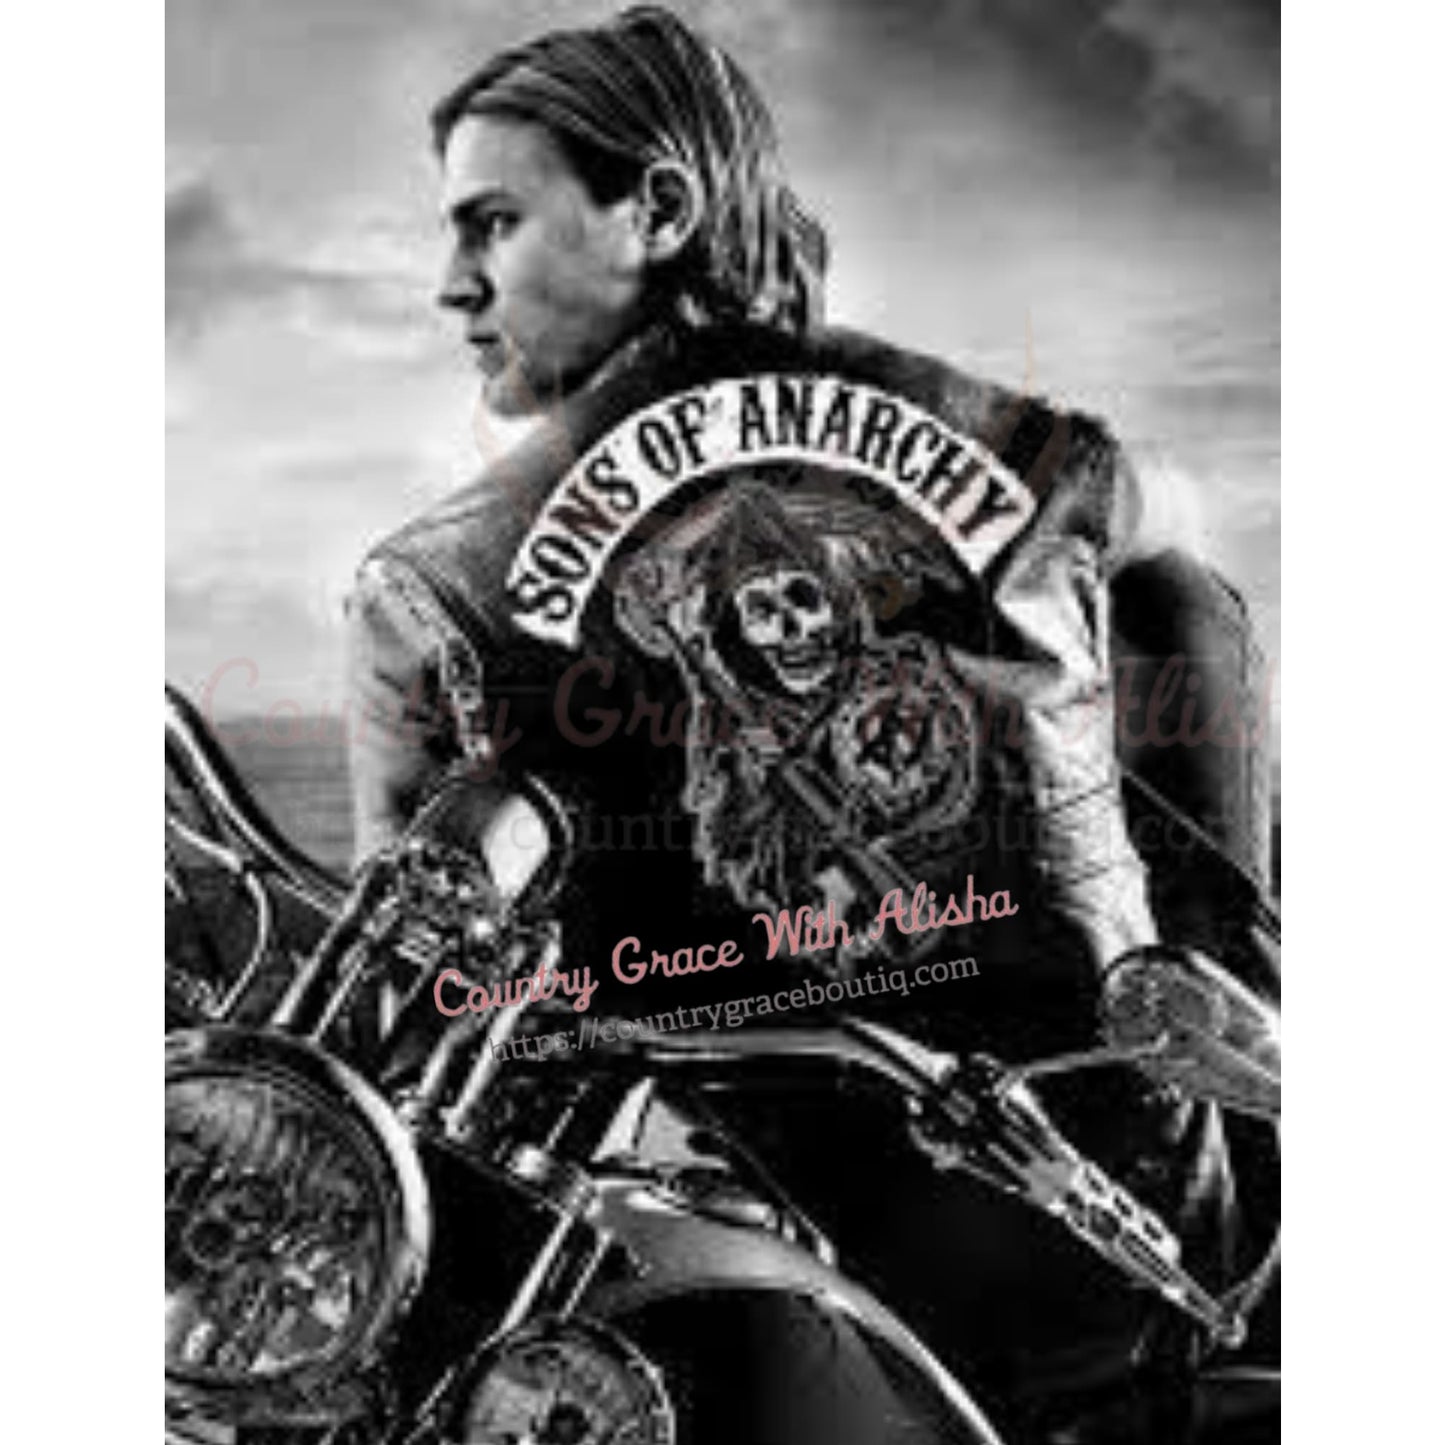 Jax Motorcycle Full Page Sublimation Transfer - Sub $2.50 